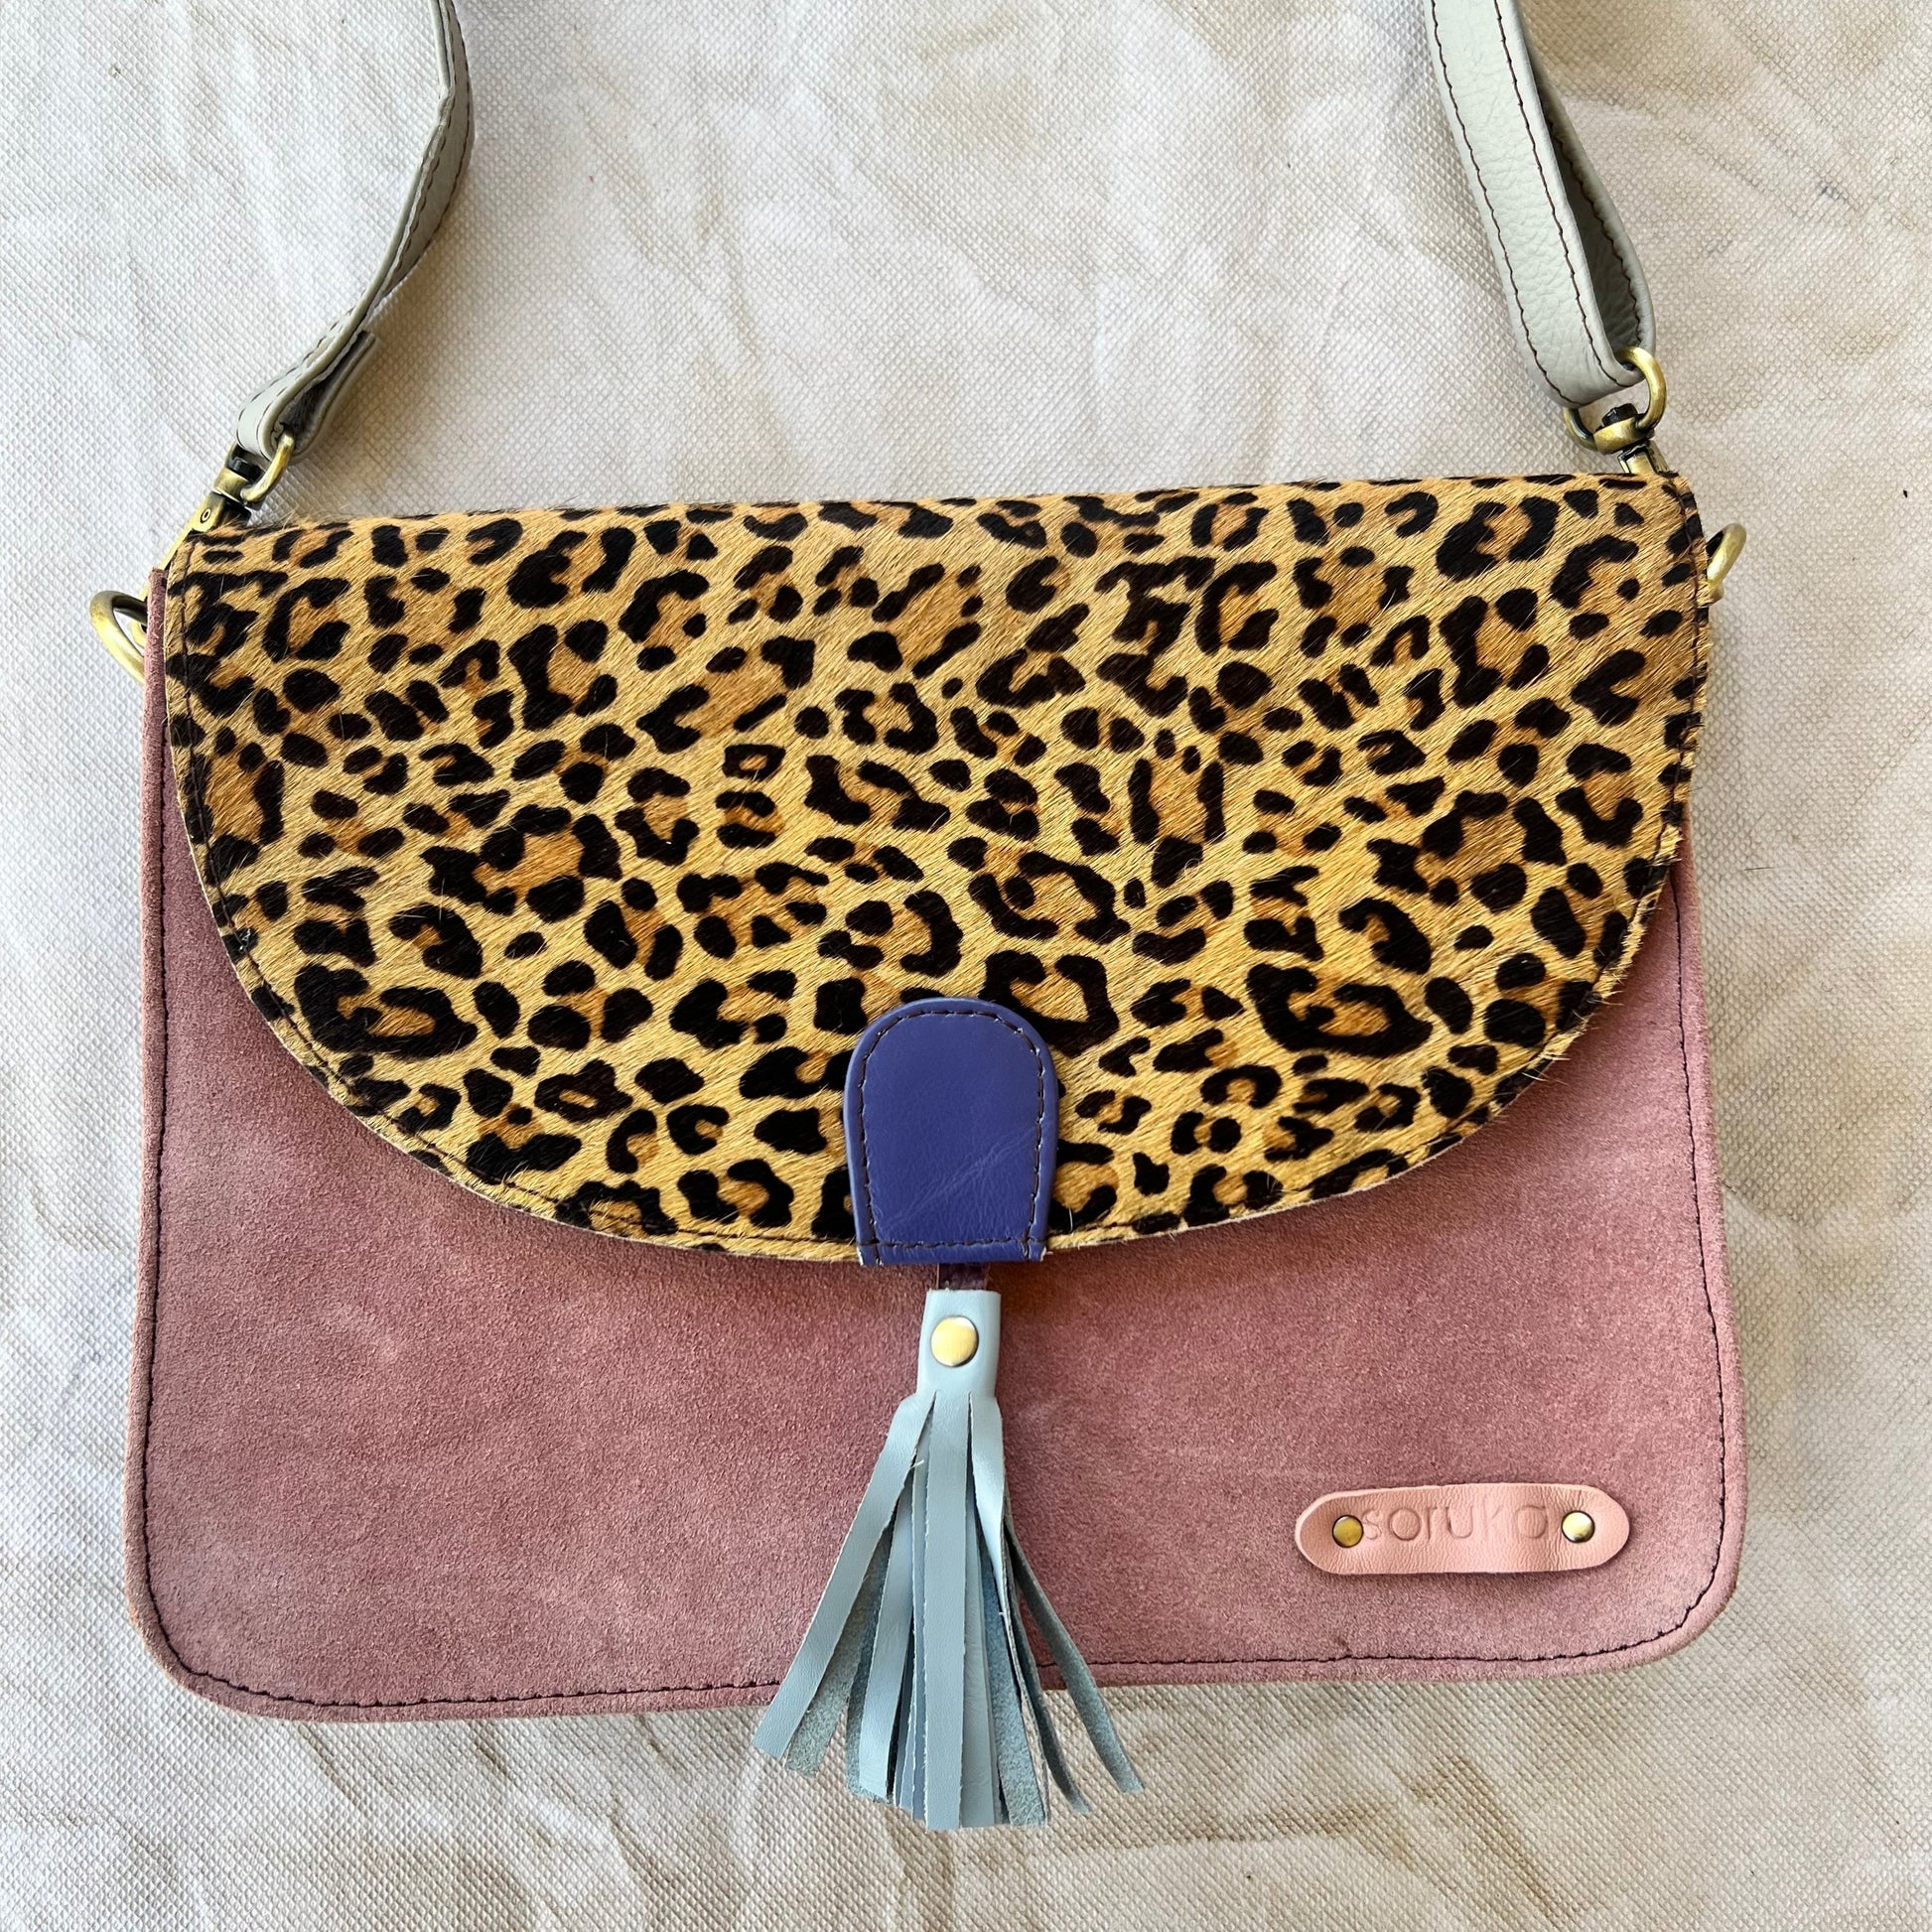 square pink bag with brown and black cheetah print flap, blue tassel, and grey strap.